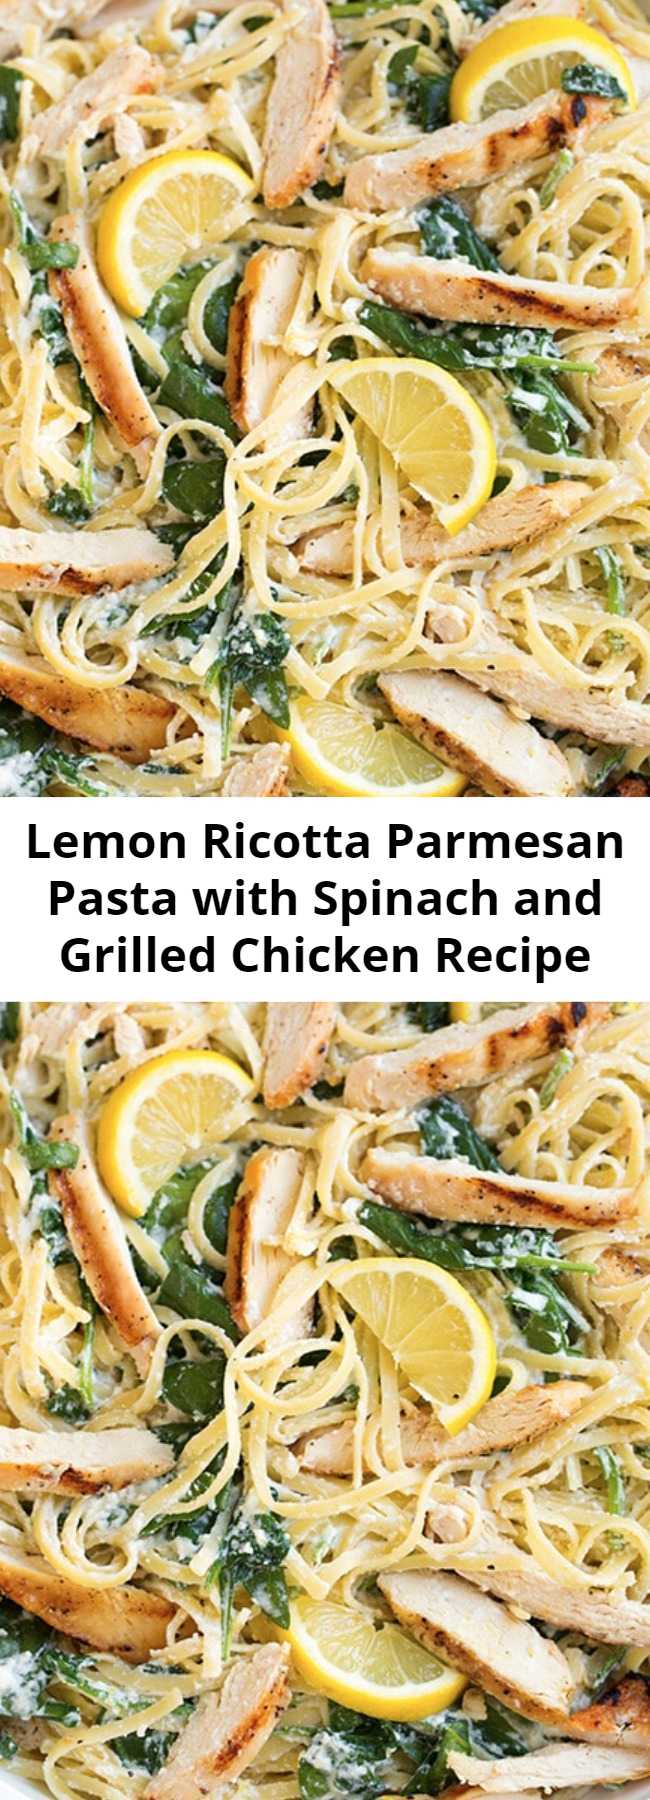 Lemon Ricotta Parmesan Pasta with Spinach and Grilled Chicken Recipe - This super quick lemon ricotta parmesan pasta with spinach and grilled chicken is perfect for weeknights.